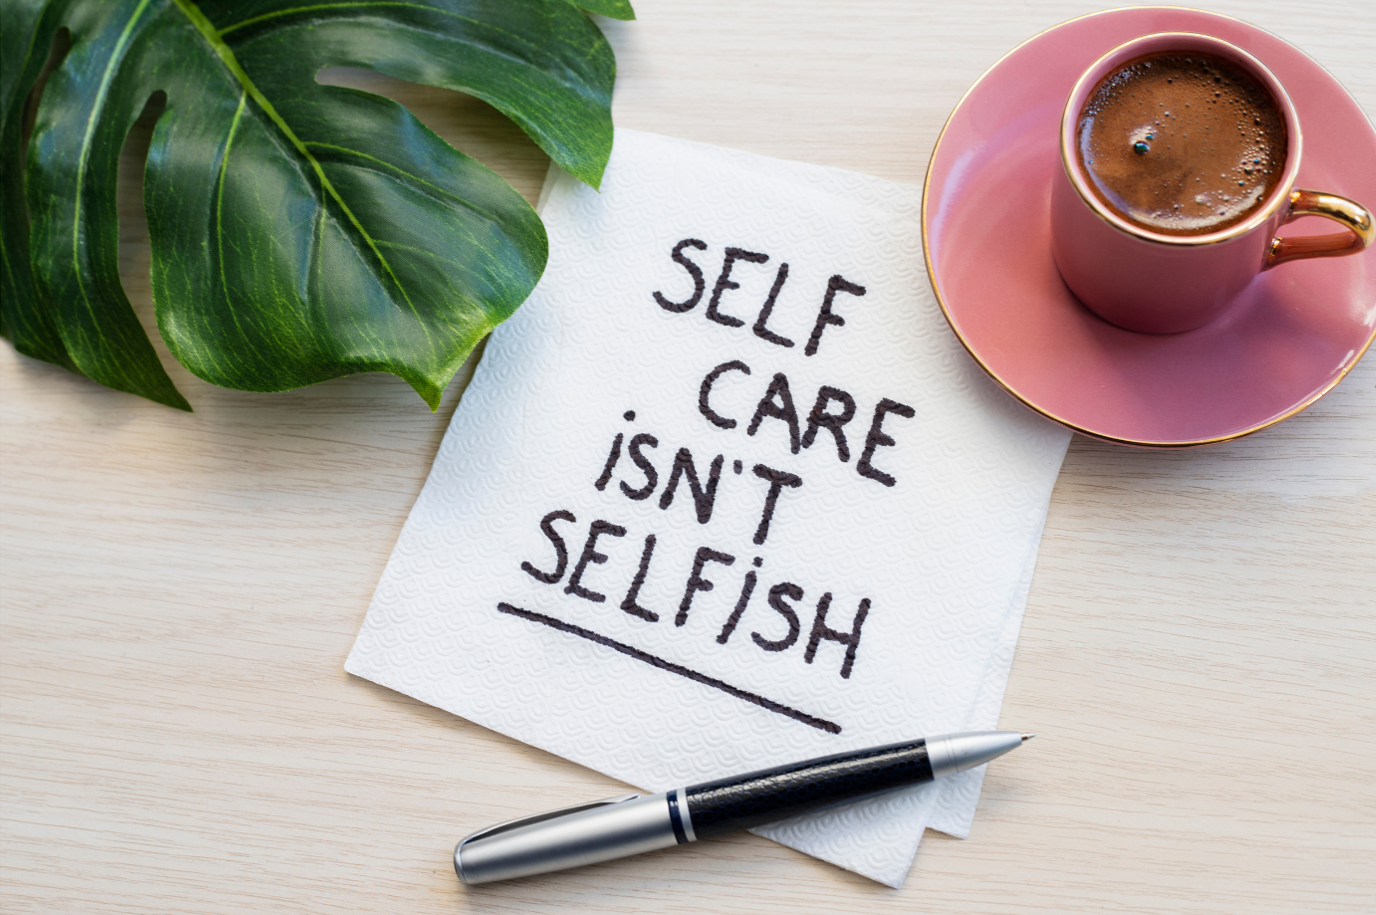 Self-care isn't selfish written on tissue paper with a pen, a cup of chocolate, and Monstera leaf on the side.